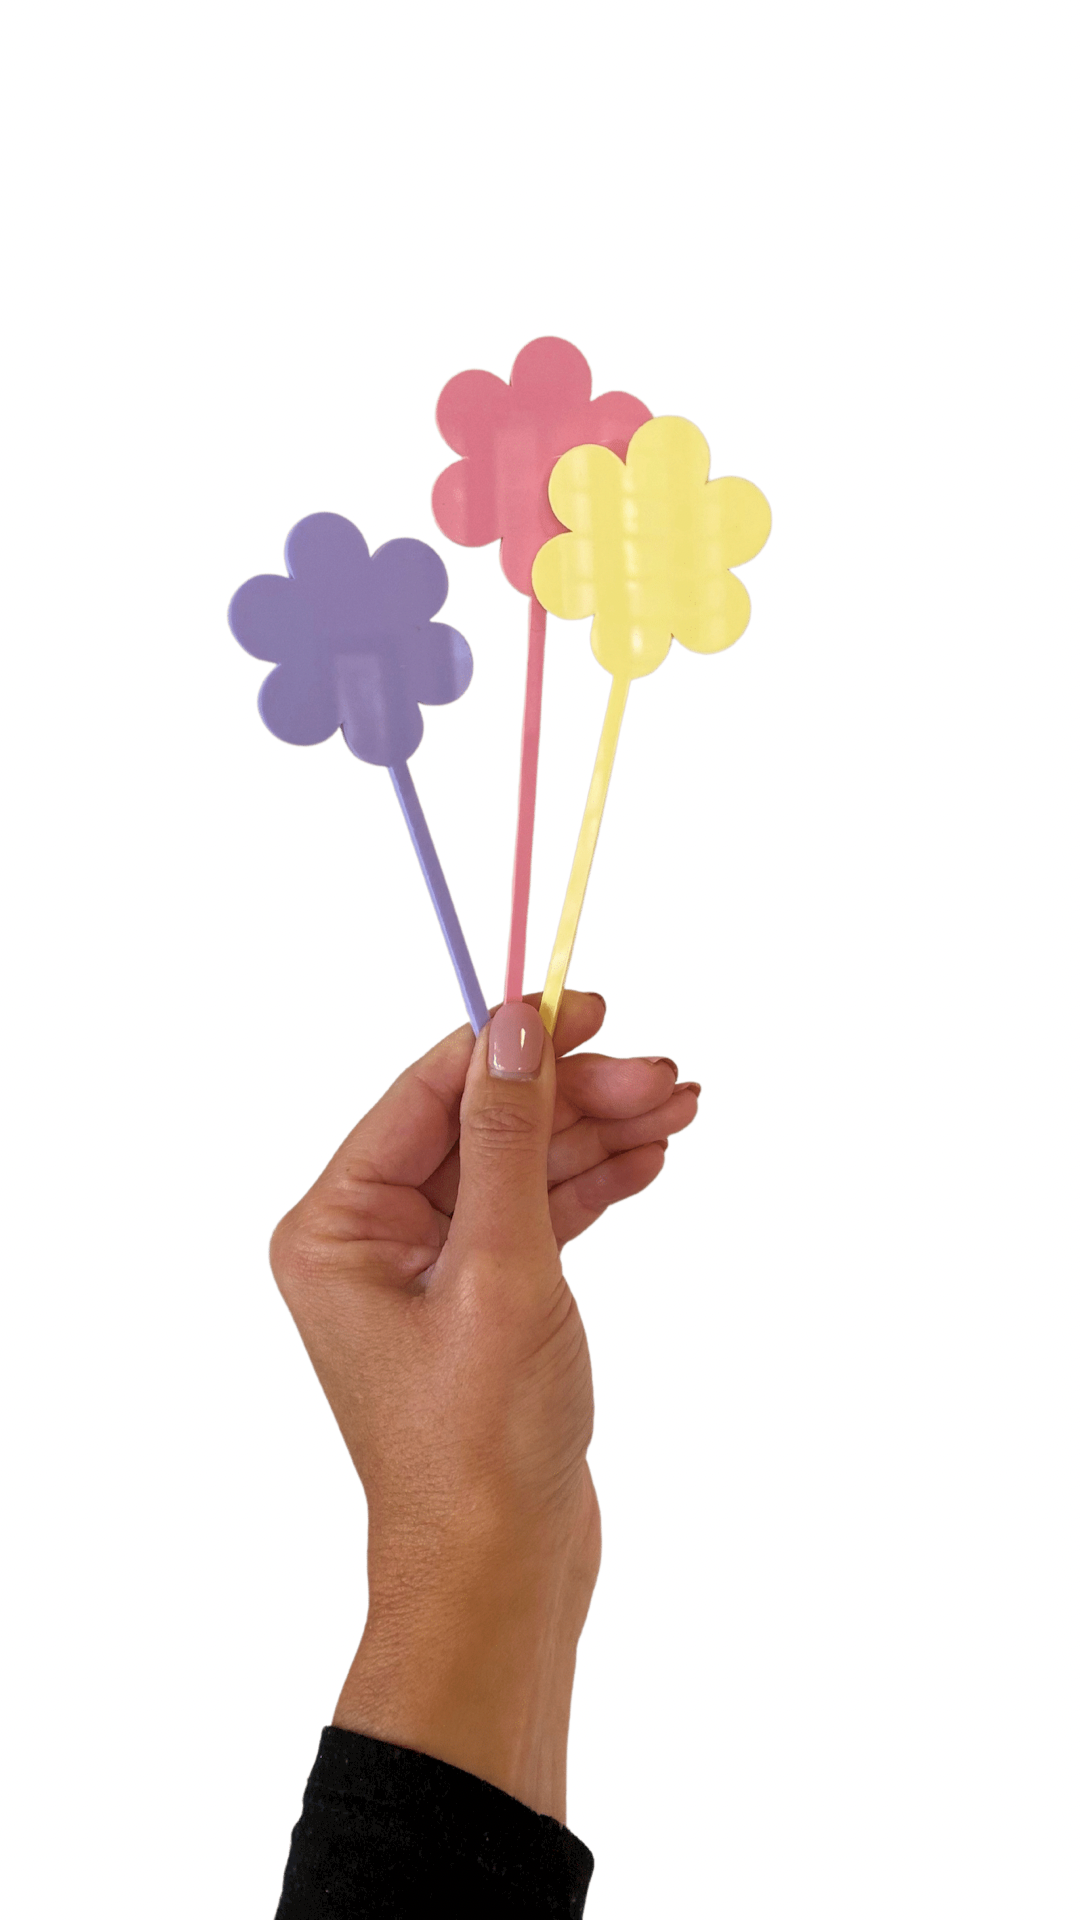 Pastel Daisy Acrylic Cake Toppers - Set of 3